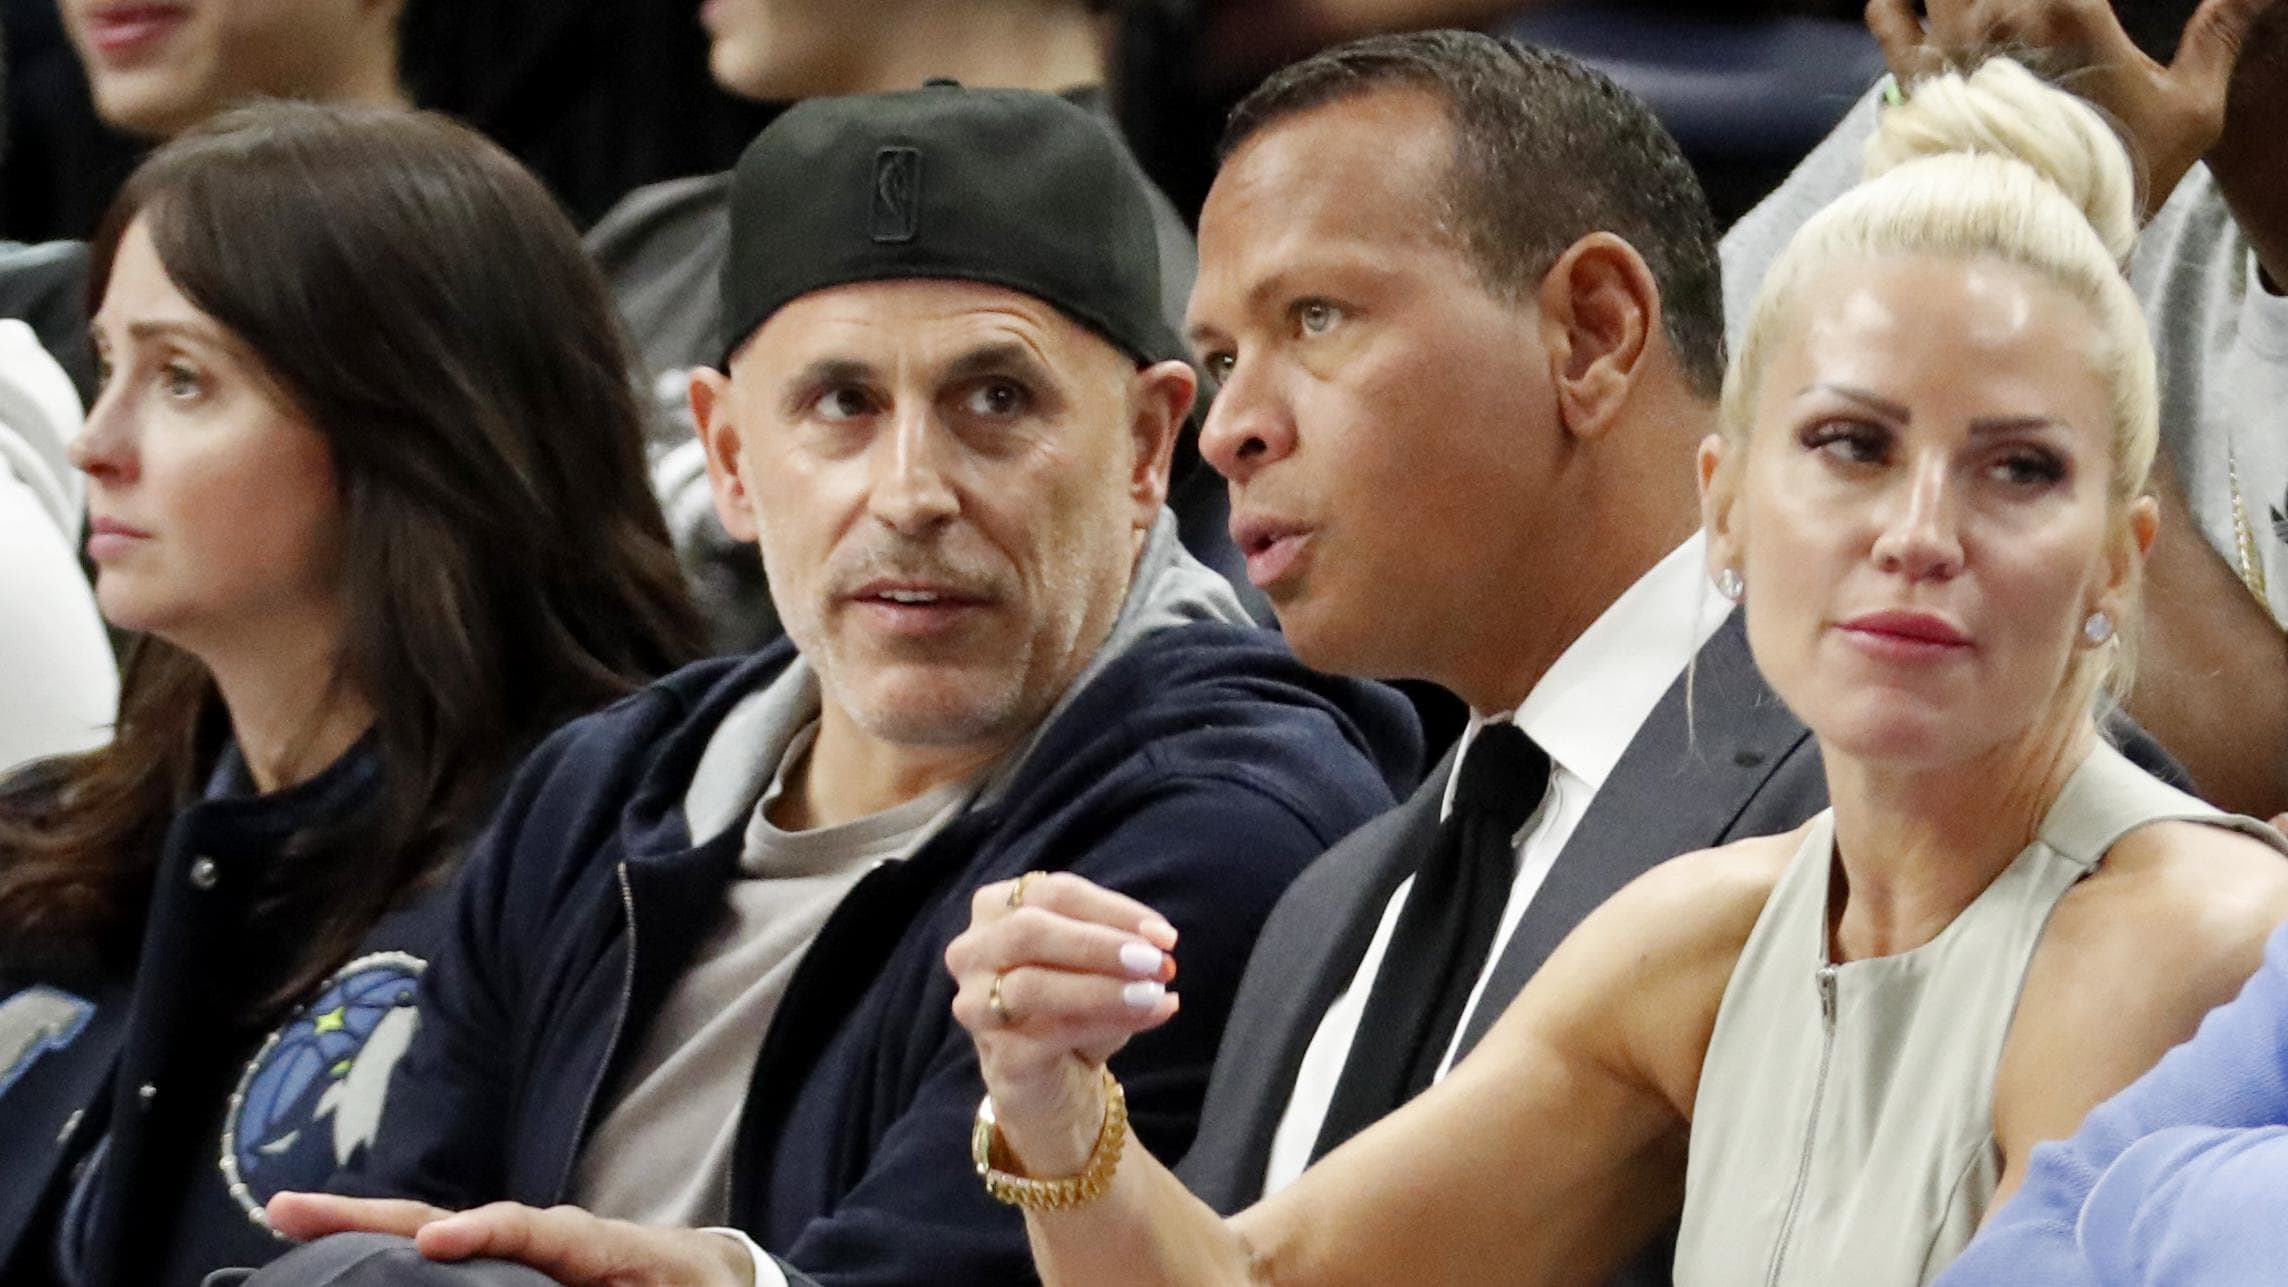 Report: Glen Taylor, A-Rod and Lore set for mediation over Timberwolves ownership dispute